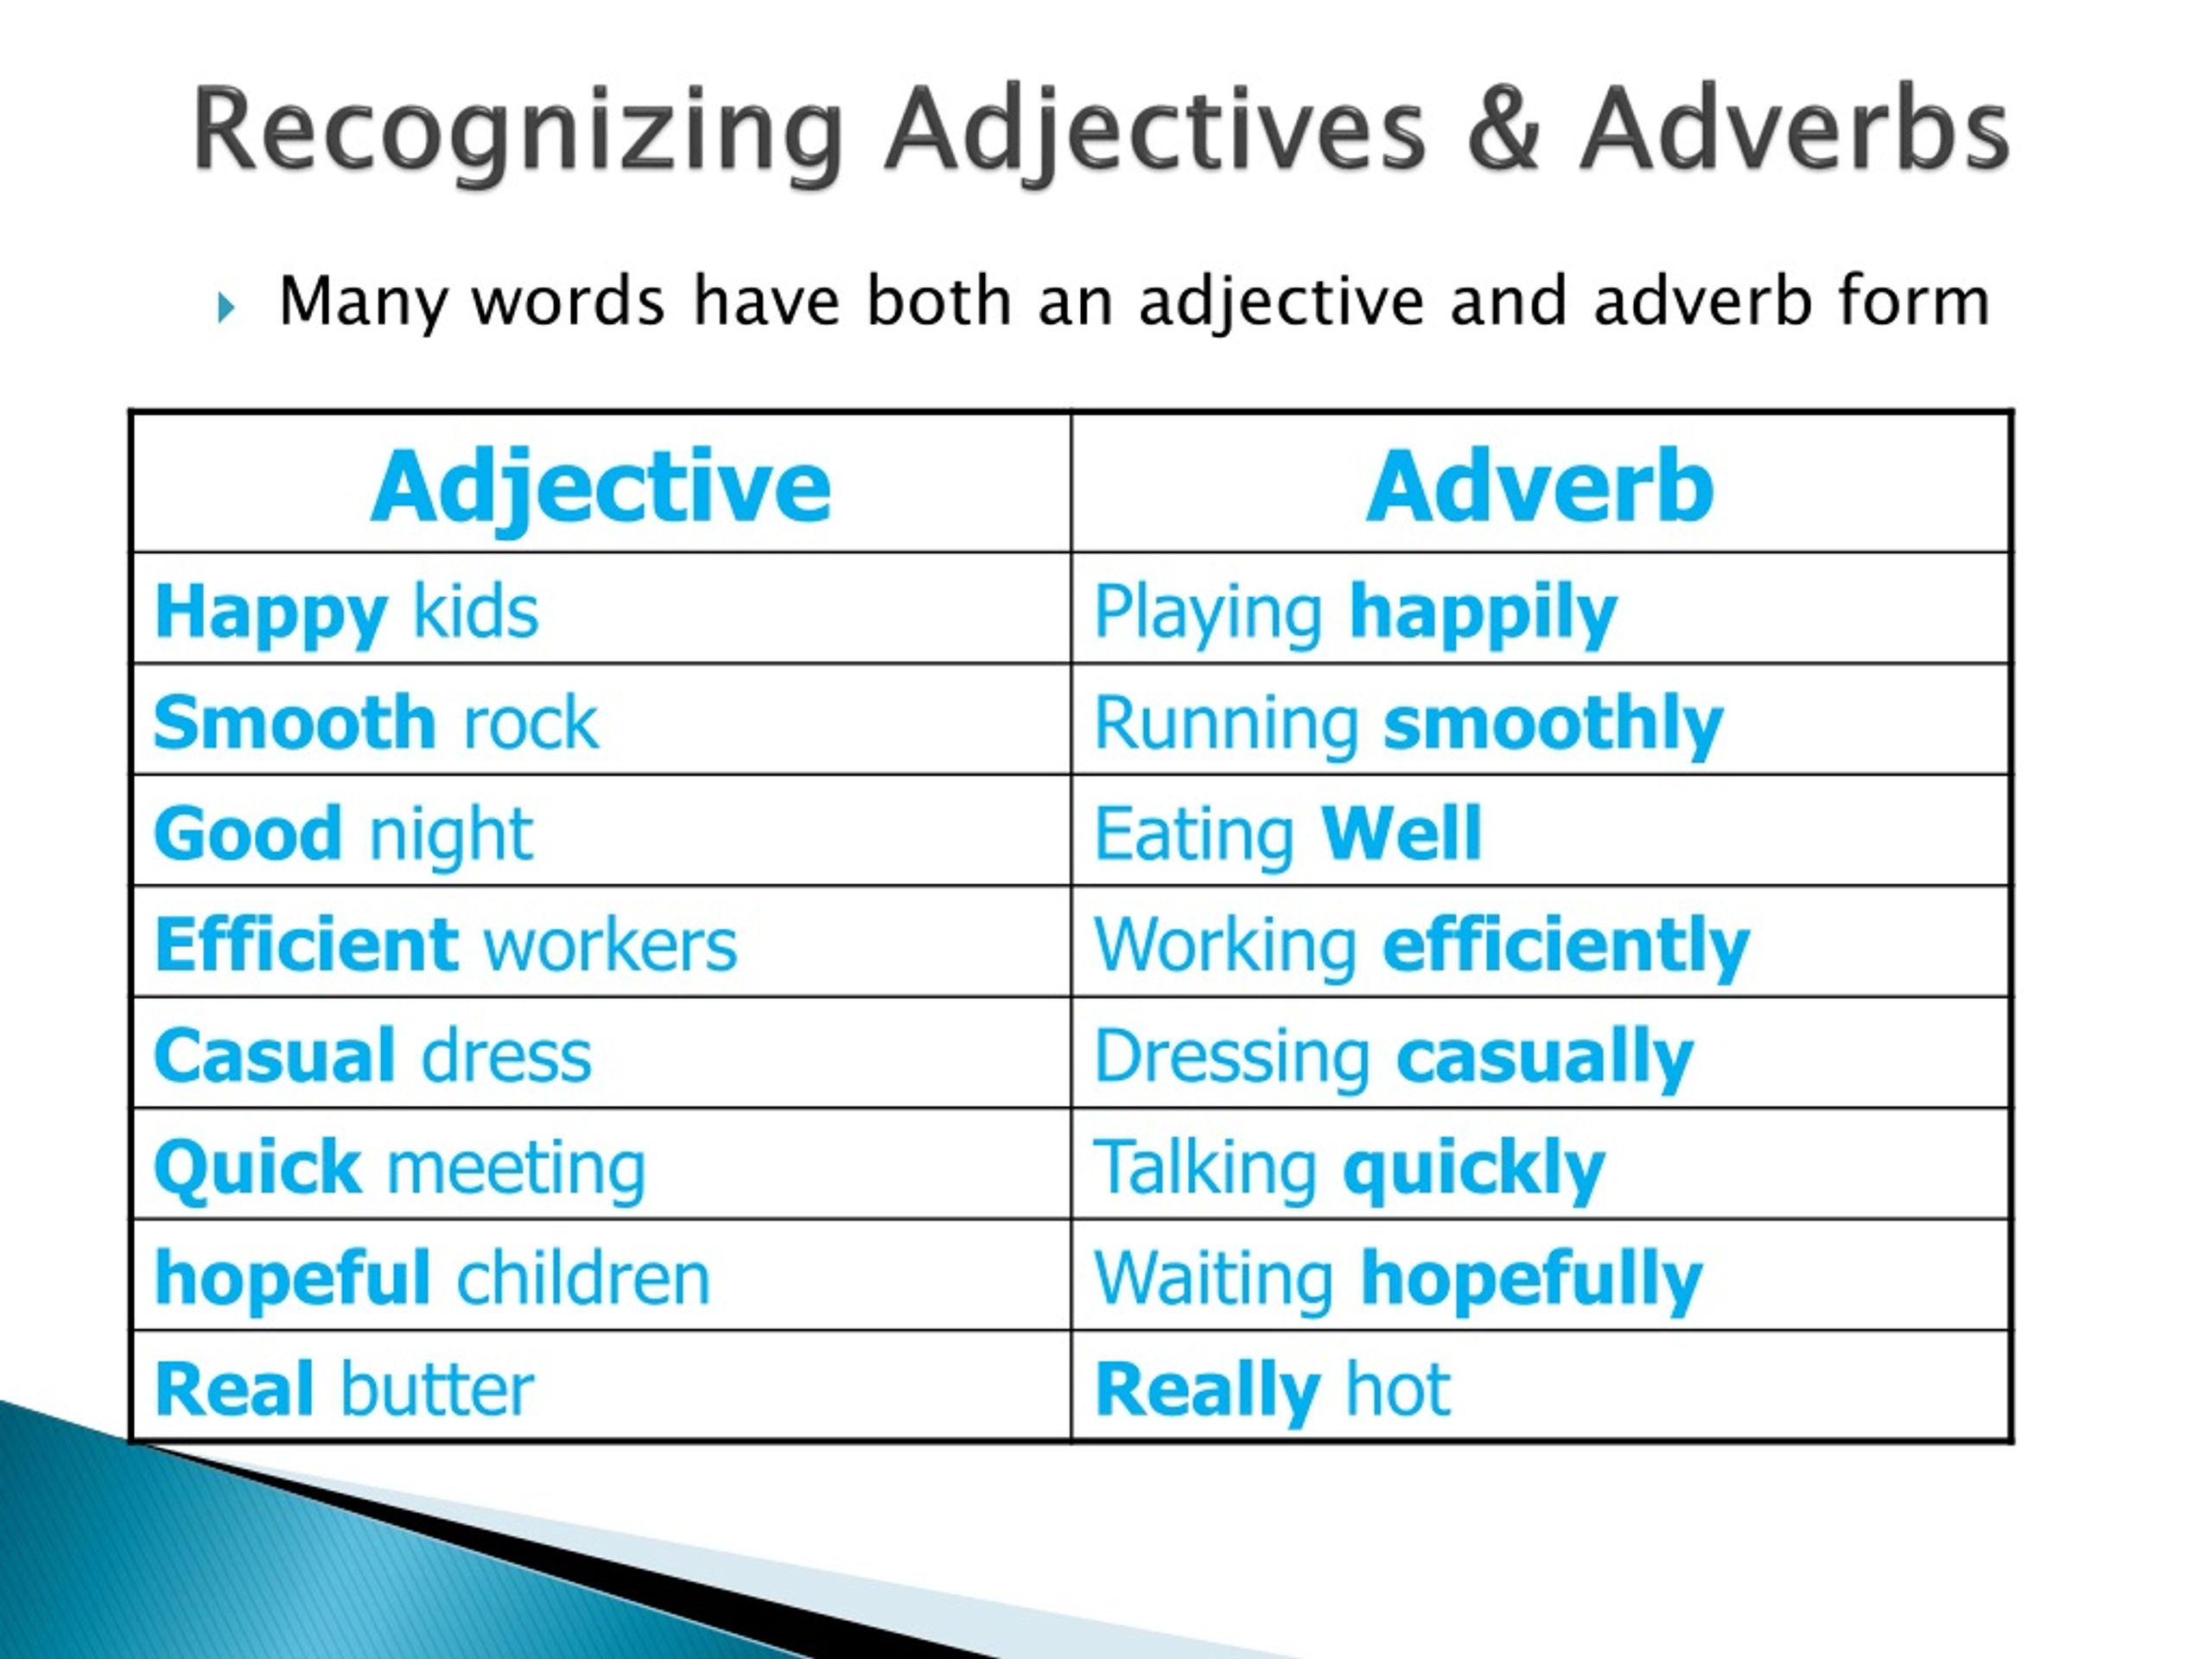 ppt-adjectives-and-adverbs-powerpoint-presentation-free-download-id-146246